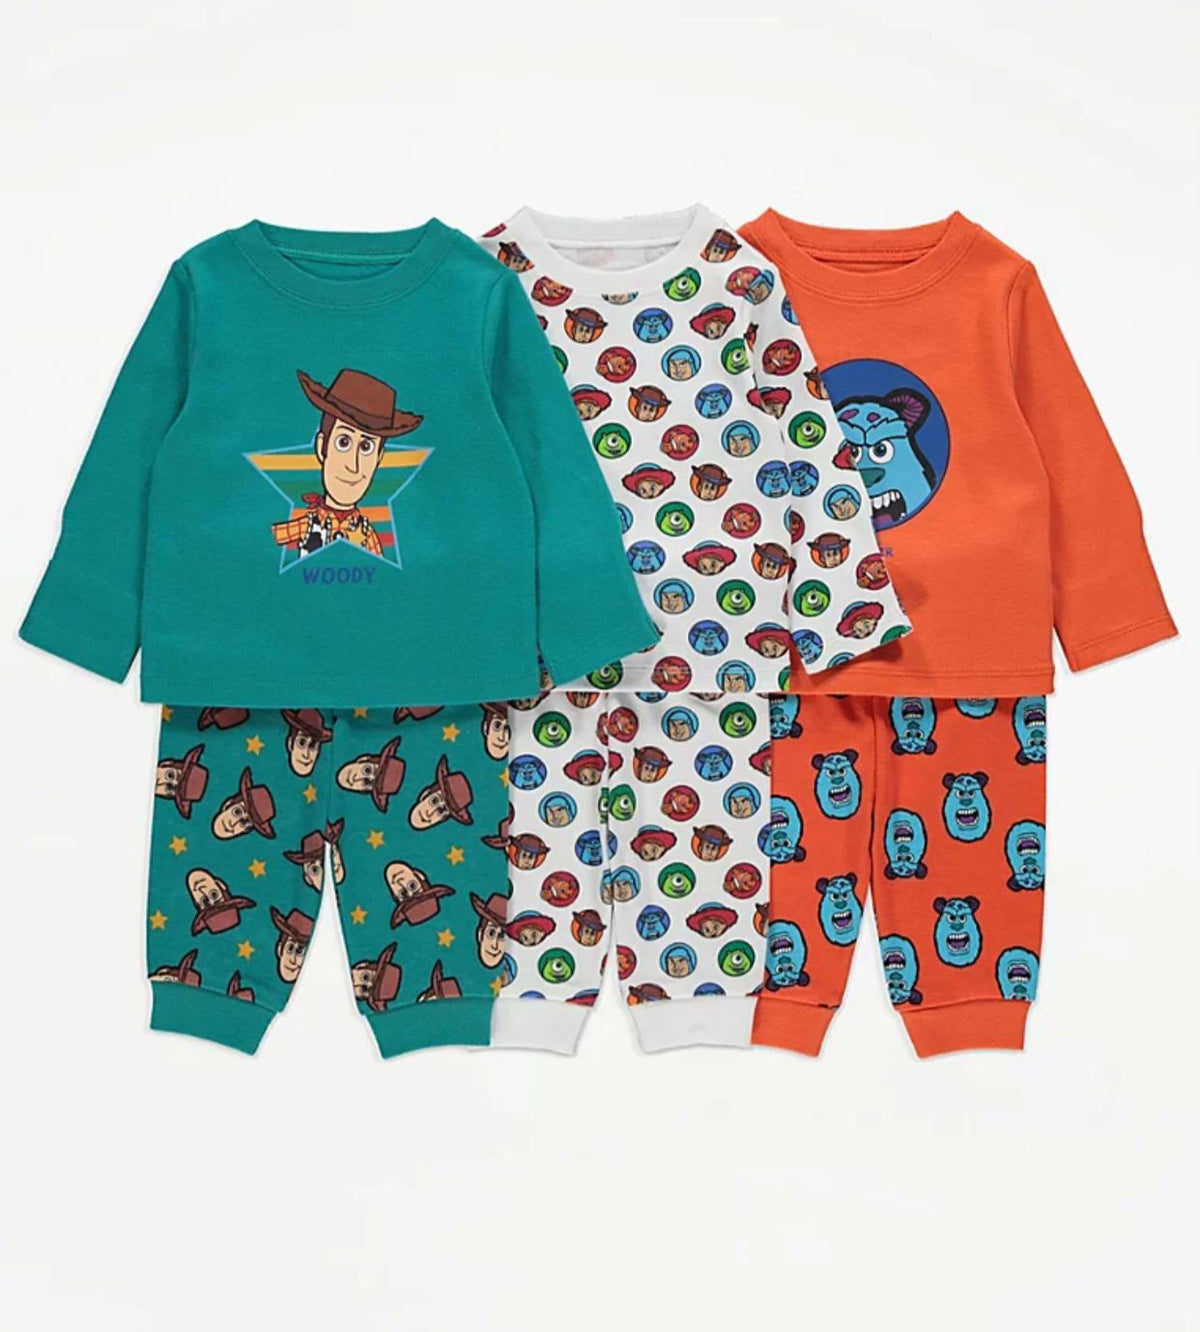 Toy story pack of 3 pj